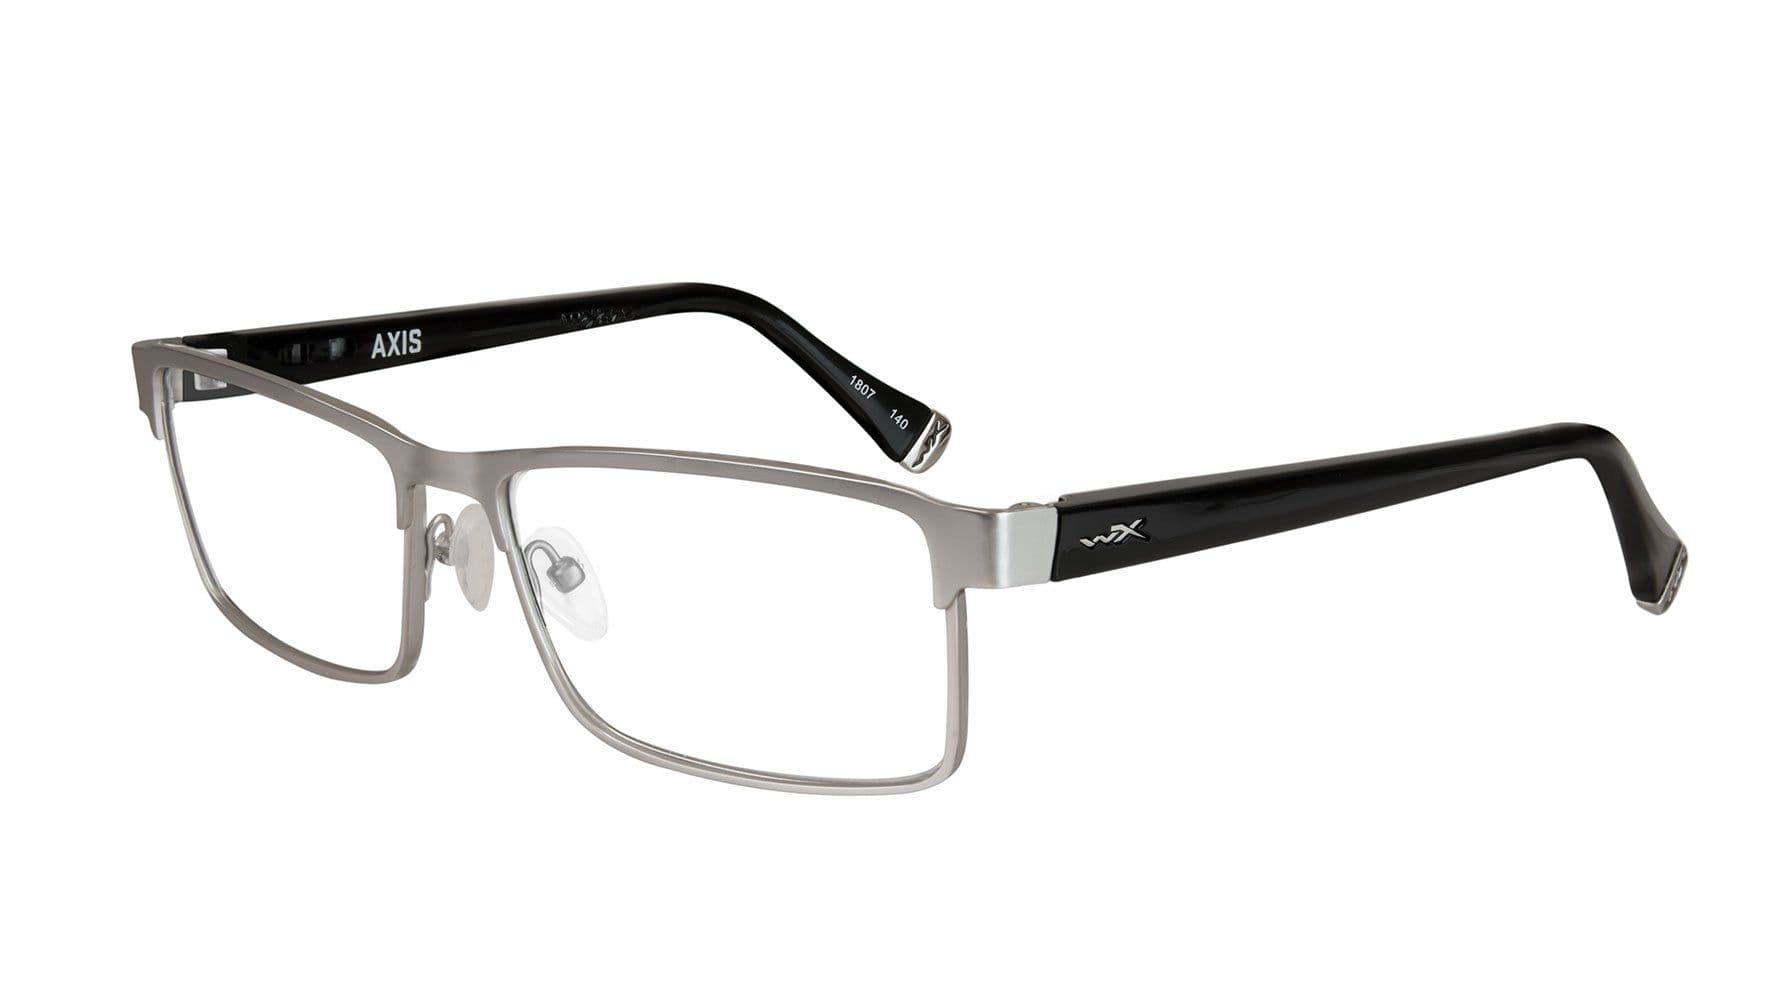 Wiley-X Axis Safety Glasses